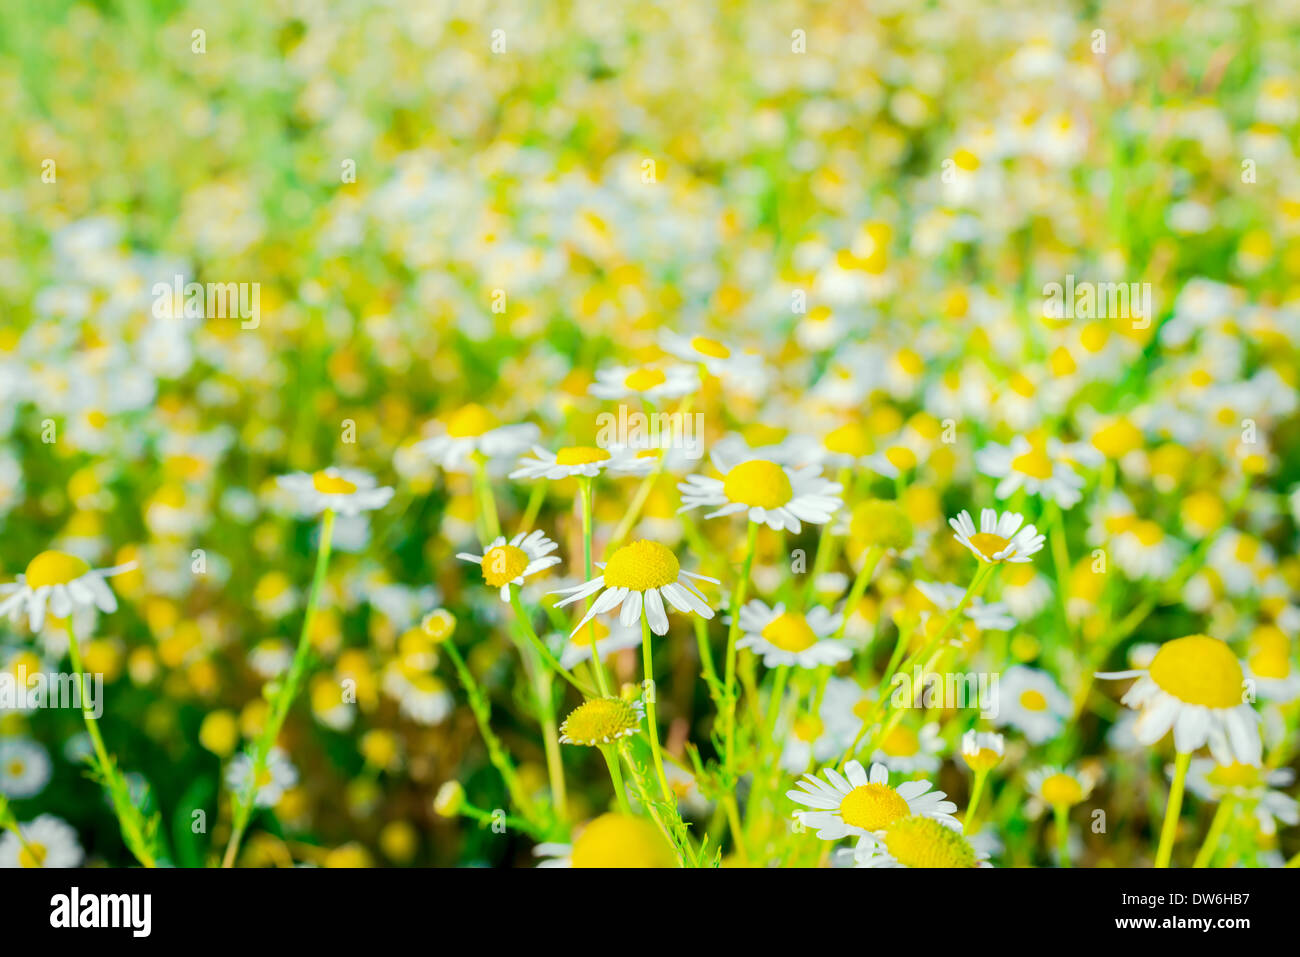 blooming fresh field of daisy flowers, background Stock Photo